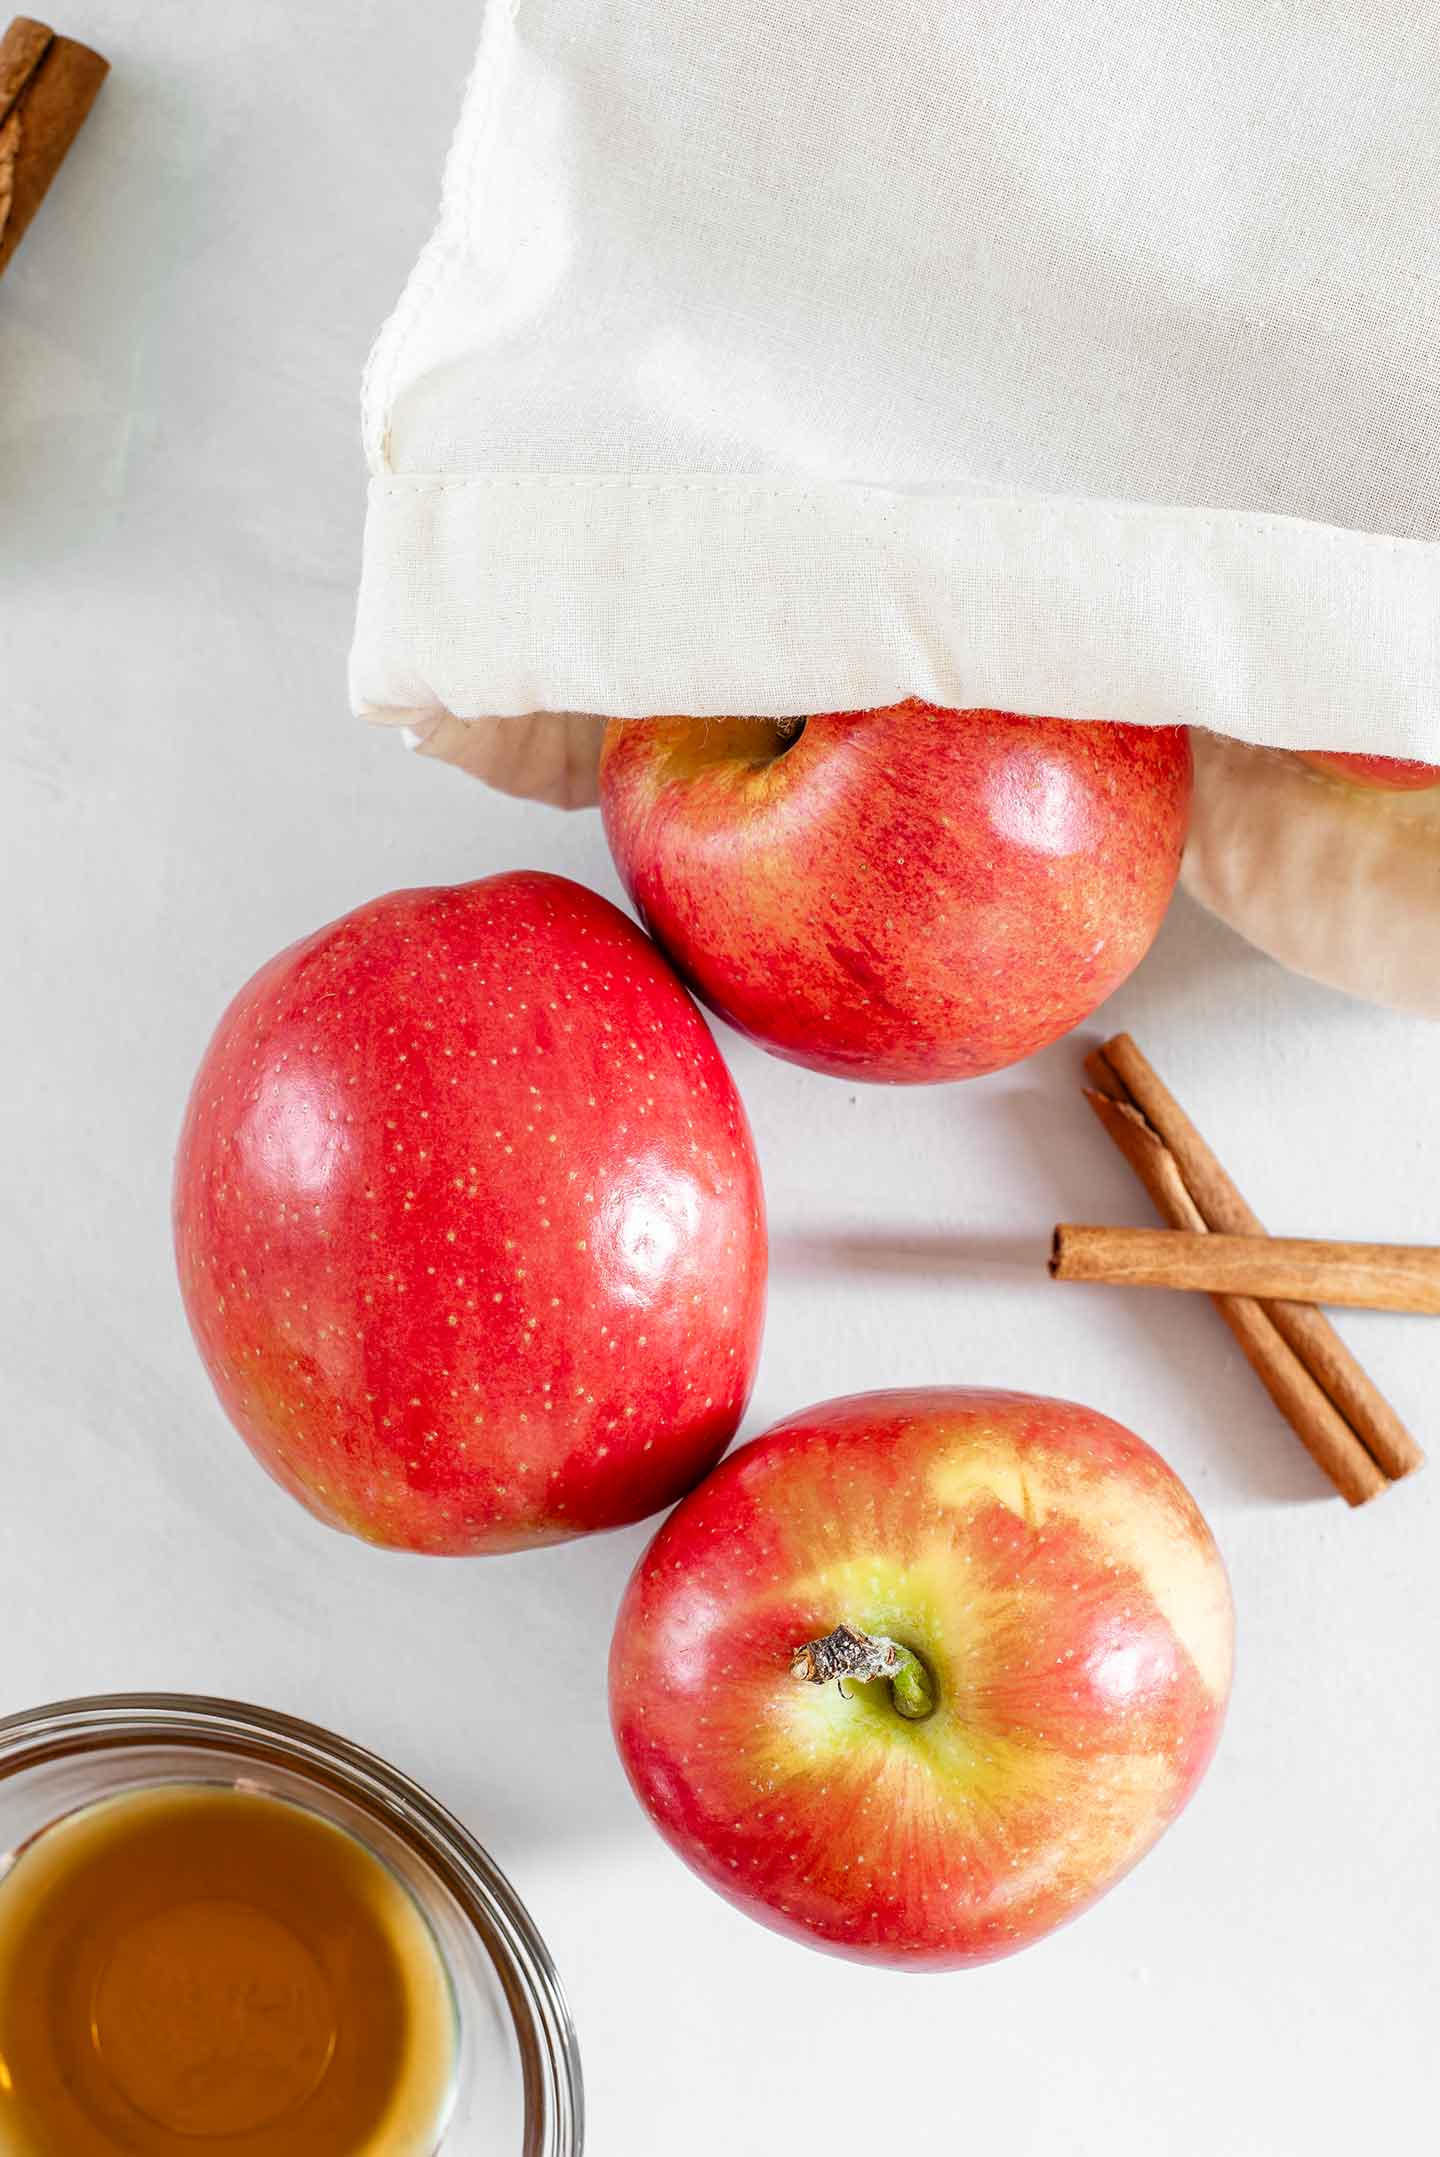 Top down view of apples spilling out of a canvas produce bag with cinnamon sticks and a small glass bowl of maple syrup to the side